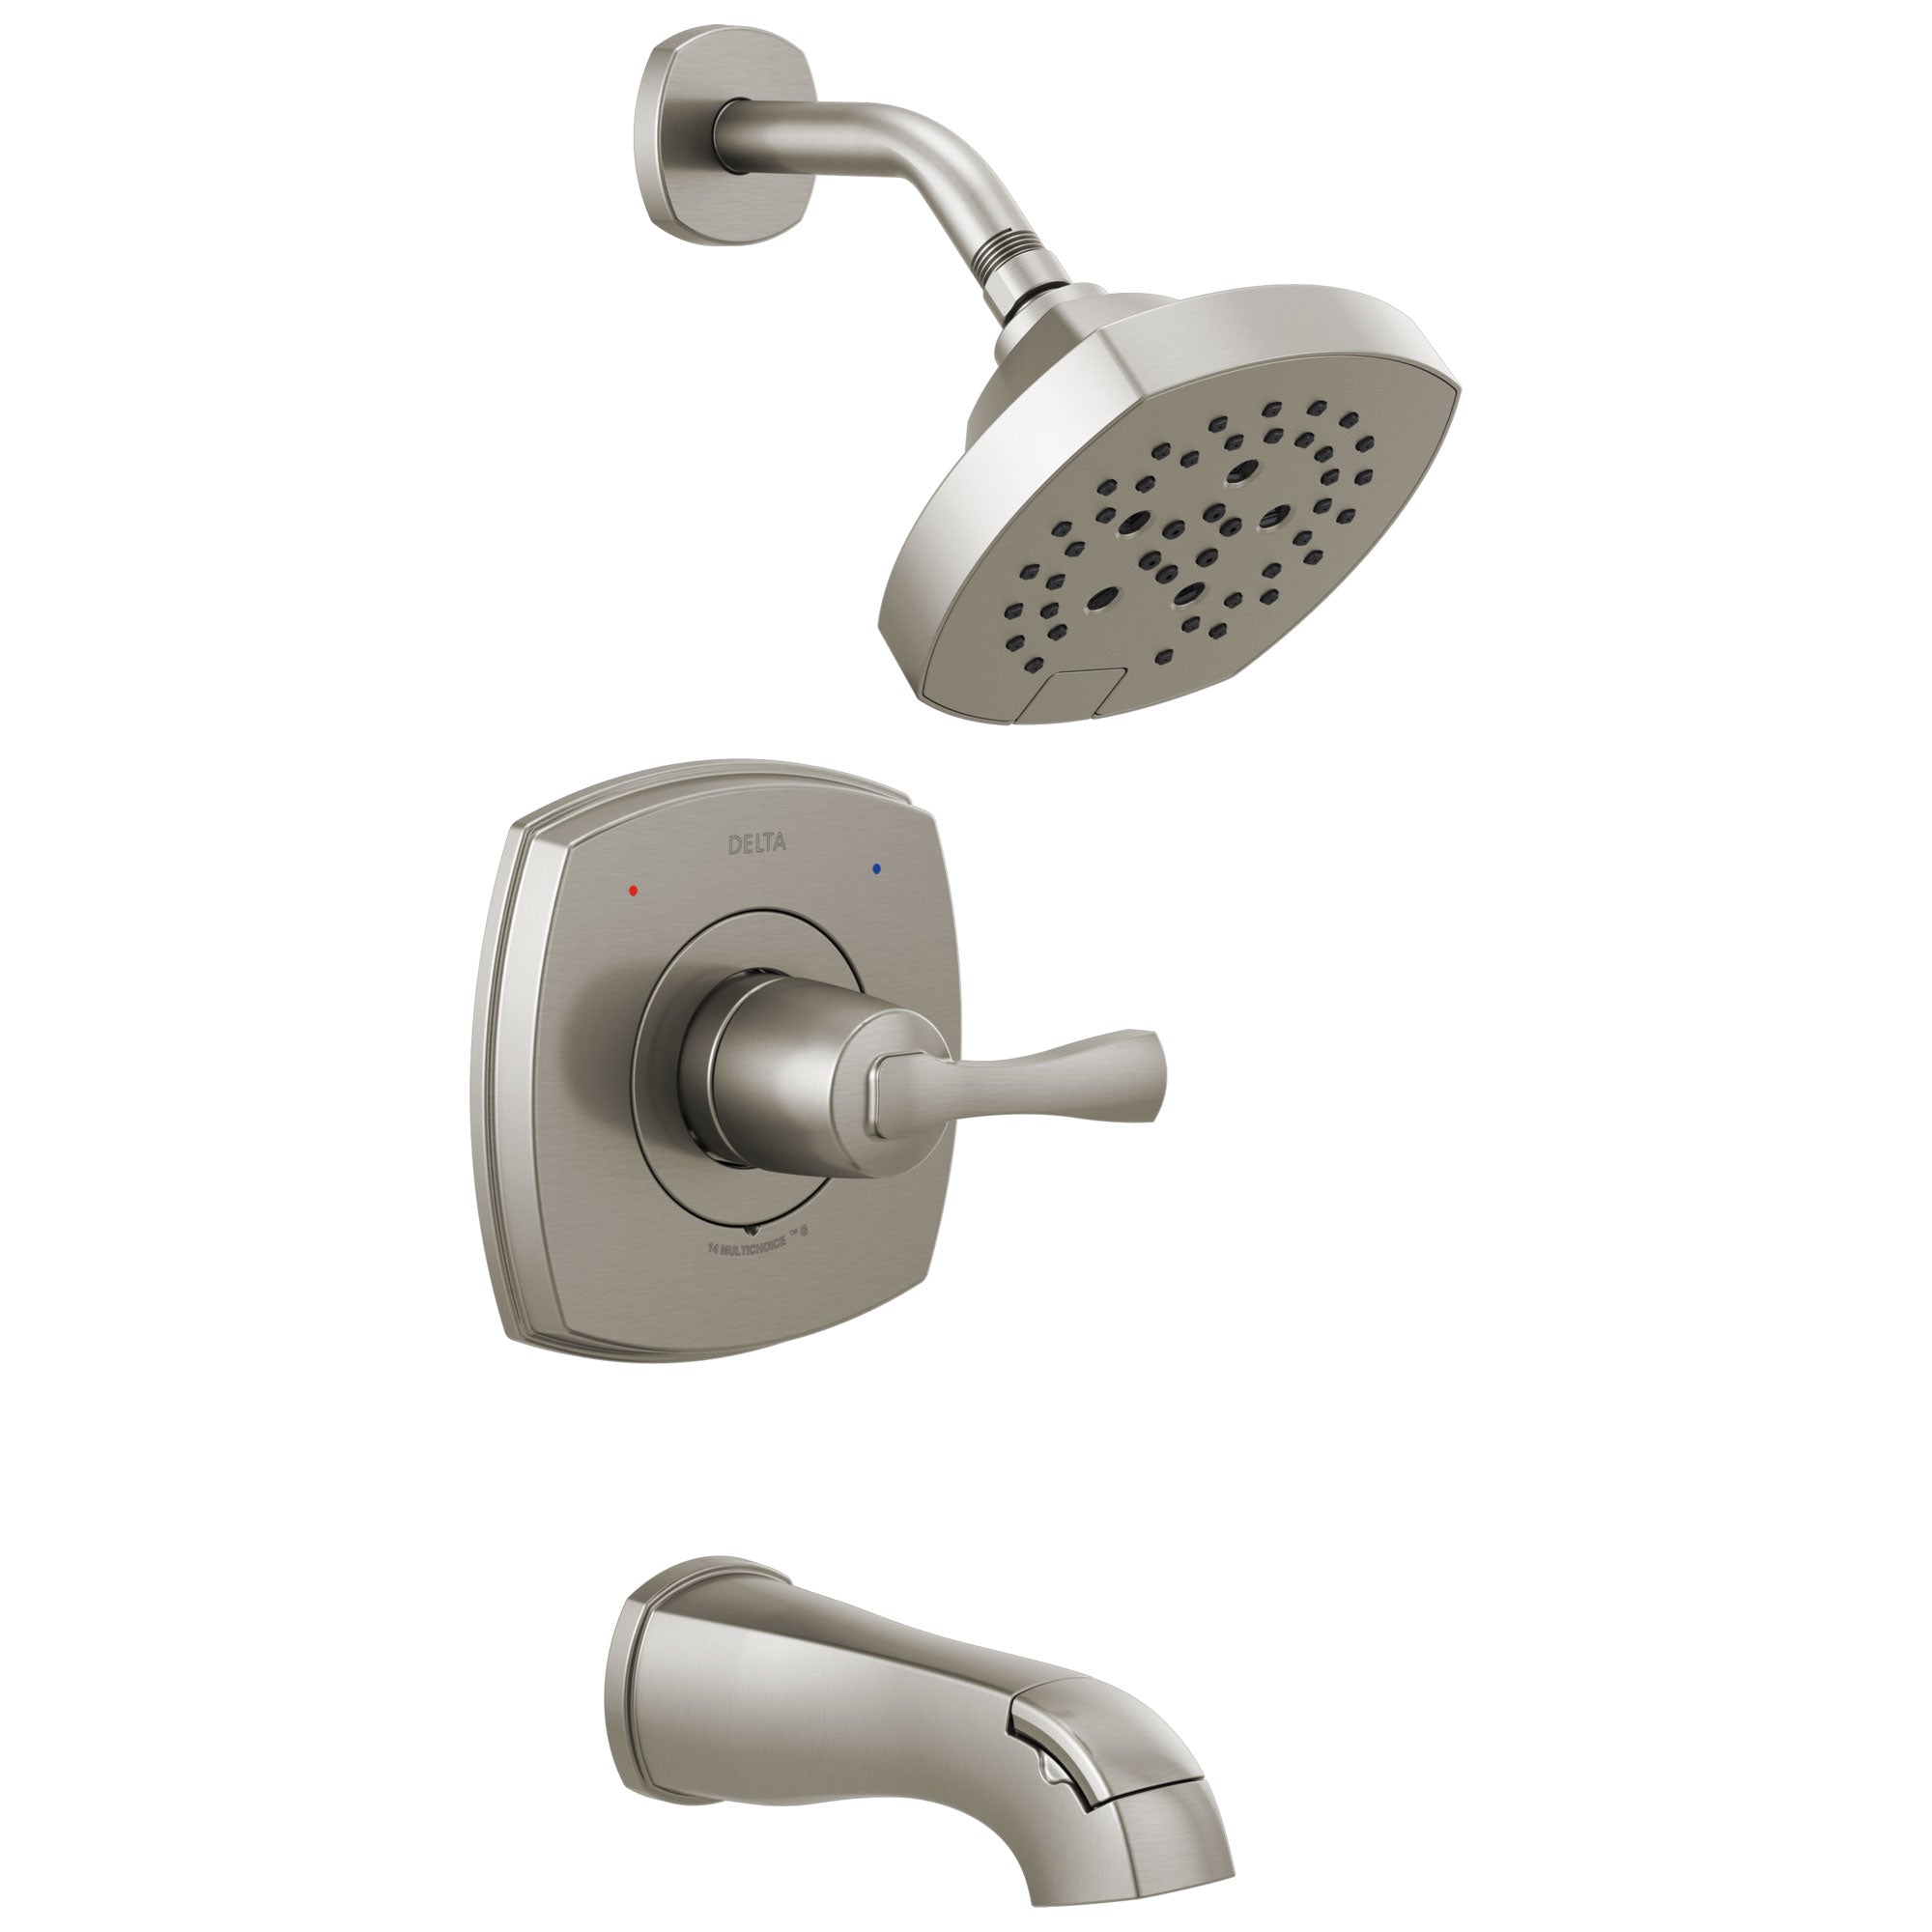 Delta Stryke Stainless Steel Finish 14 Series Tub & Shower Combination Faucet Includes Single Lever Handle, Cartridge, and Valve without Stops D3427V